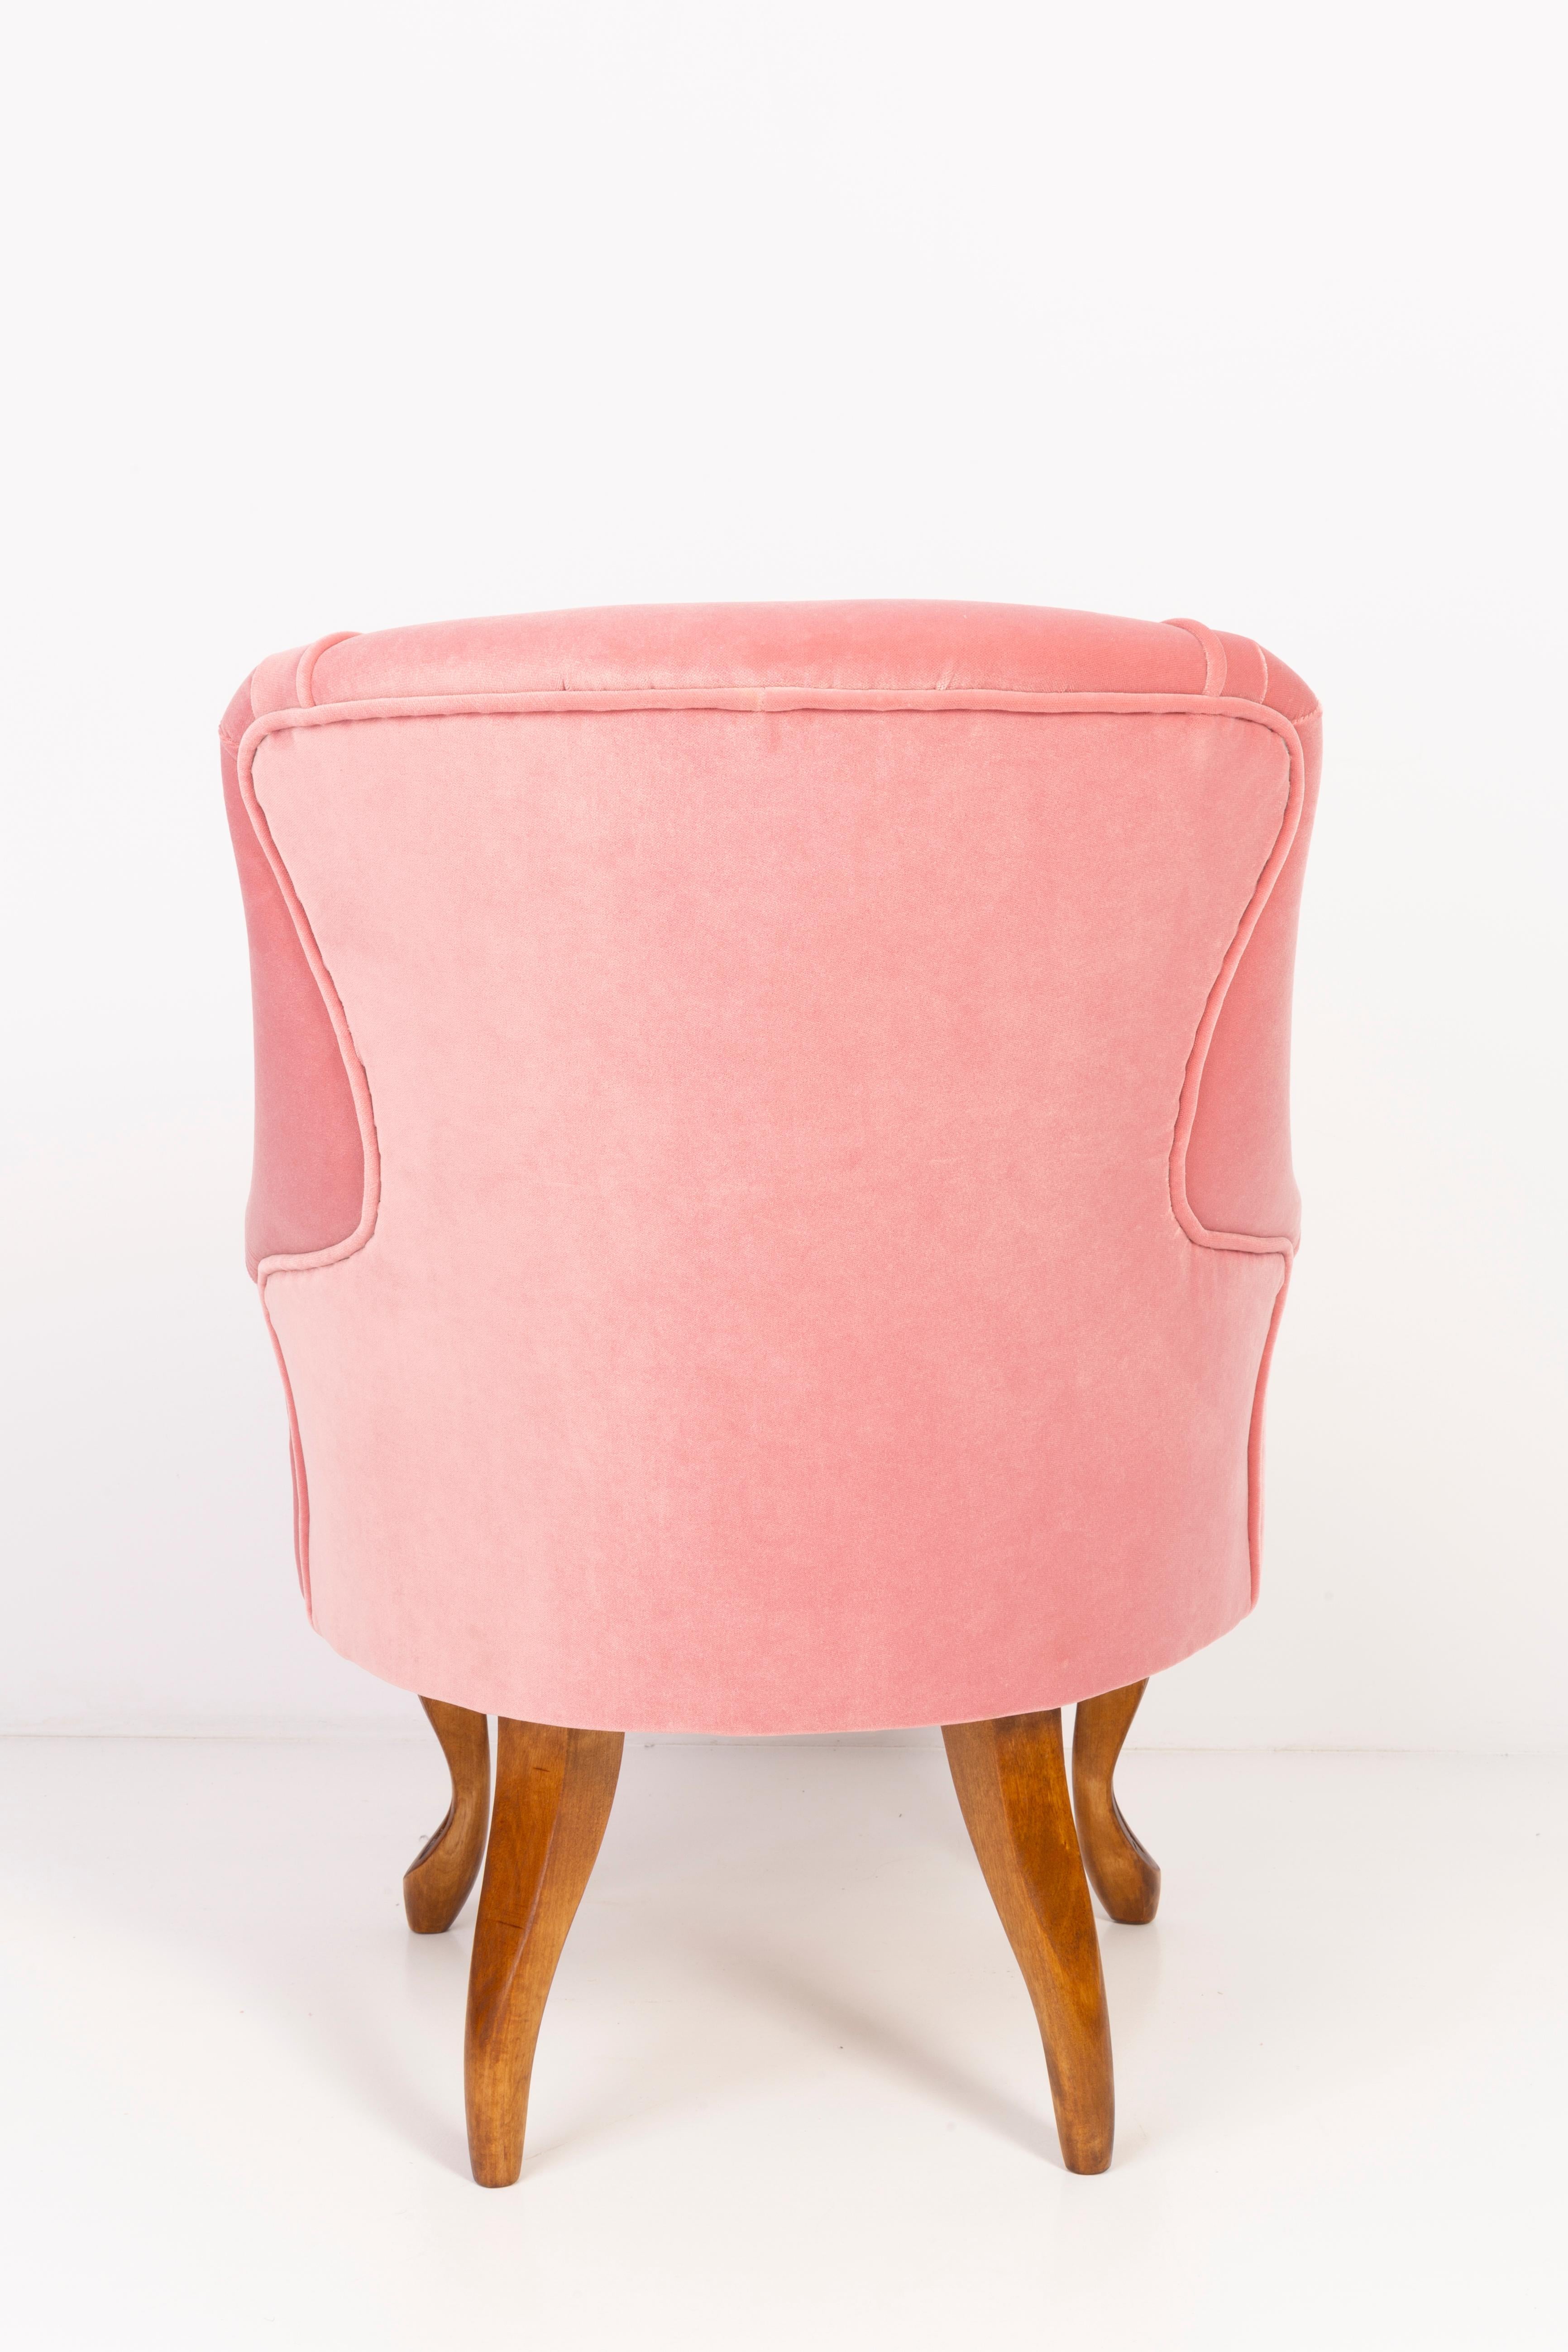 Set of Two 20th Century Art Deco Baby Pink Armchairs, 1950s For Sale 1